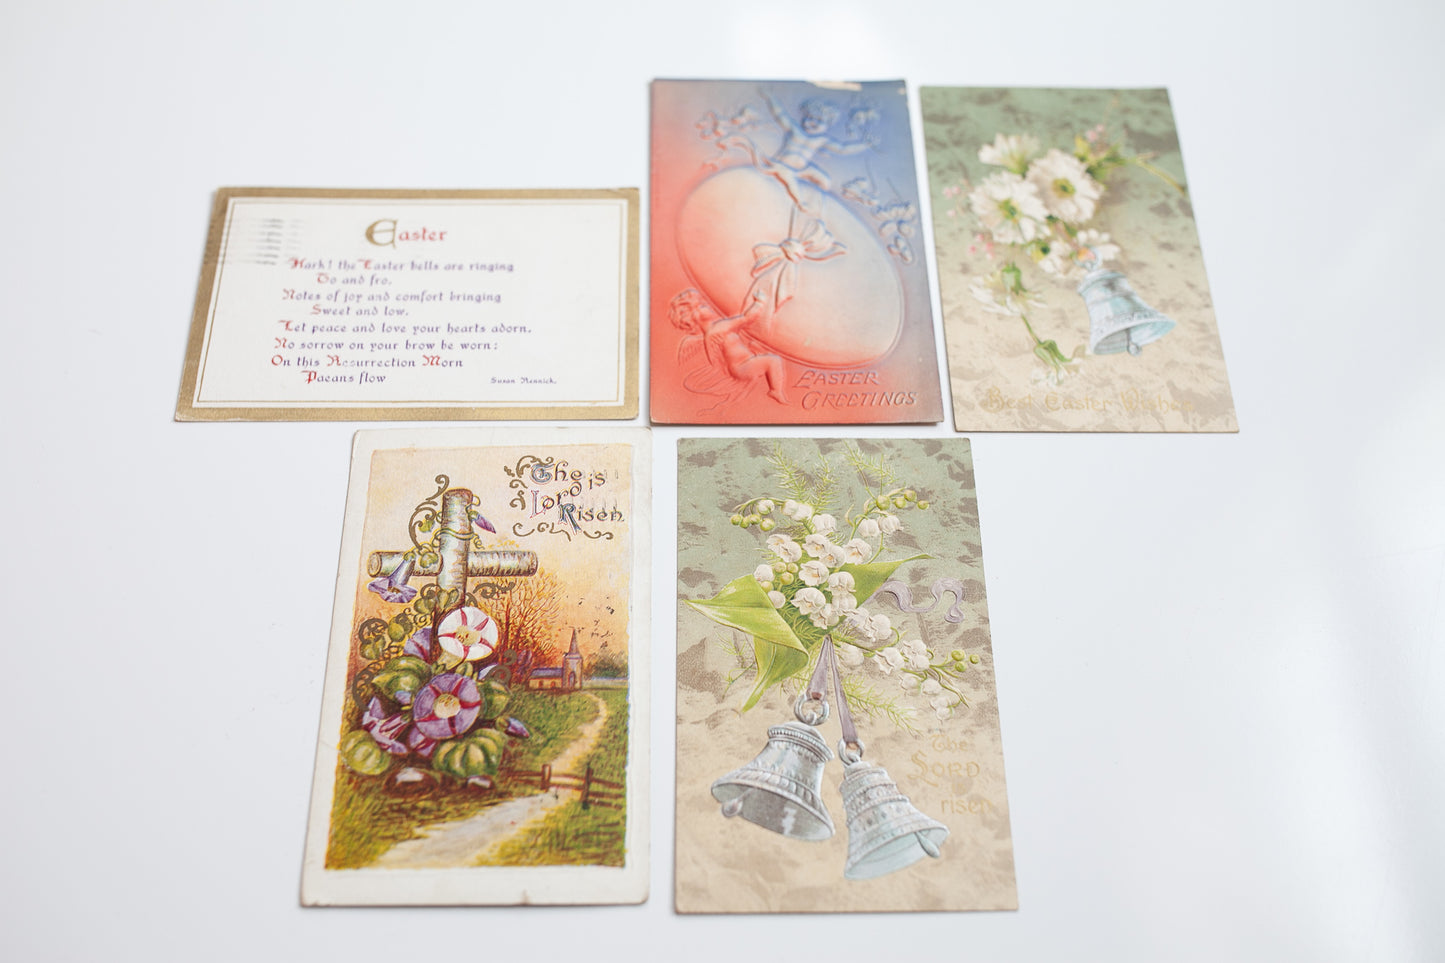 Antique Easter Post Cards - Post Cards